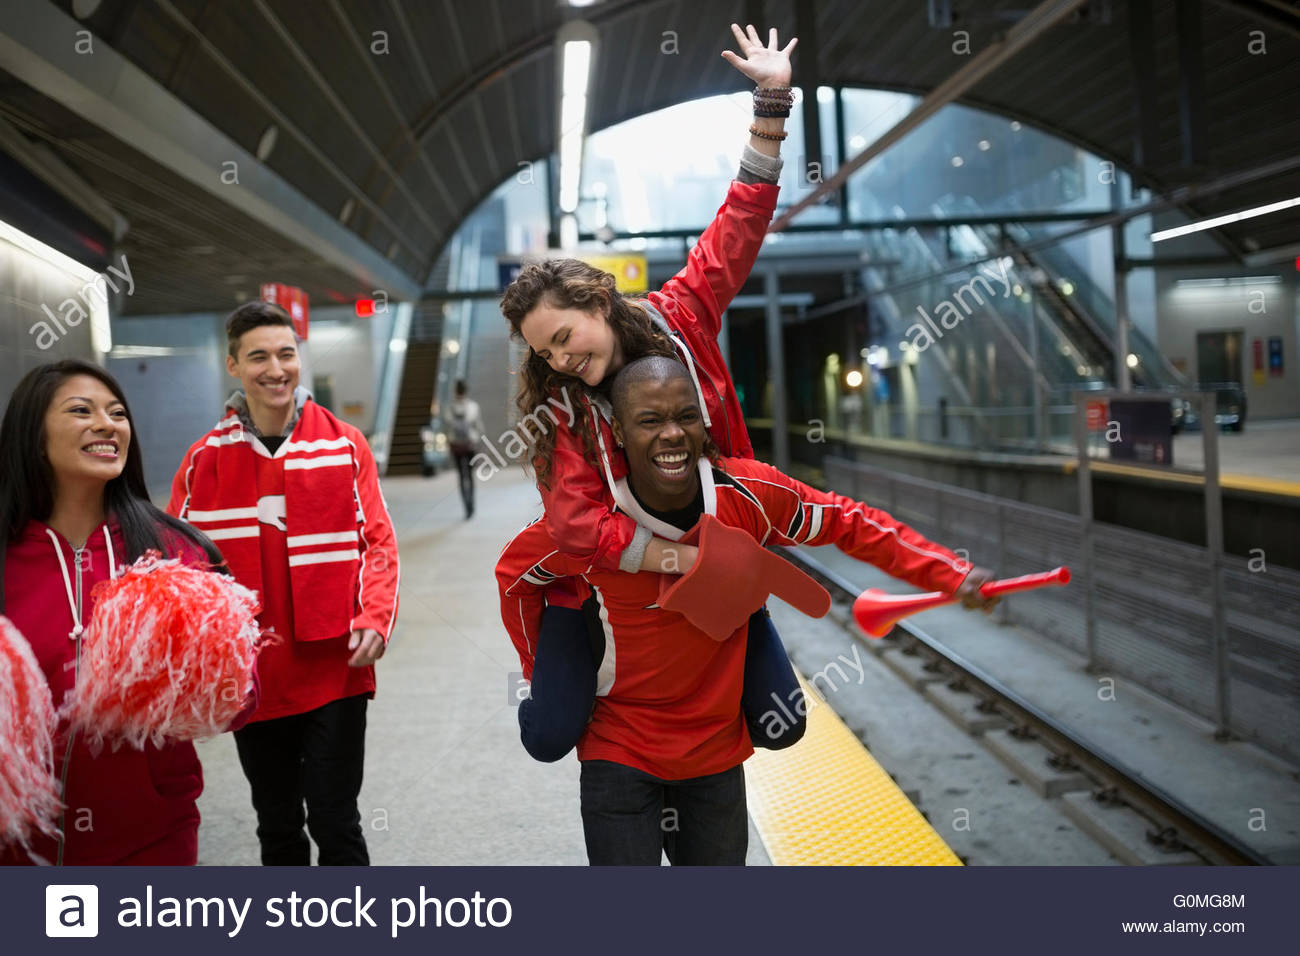 Enthusiastic sports fans red cheering subway station platform Stock Photo